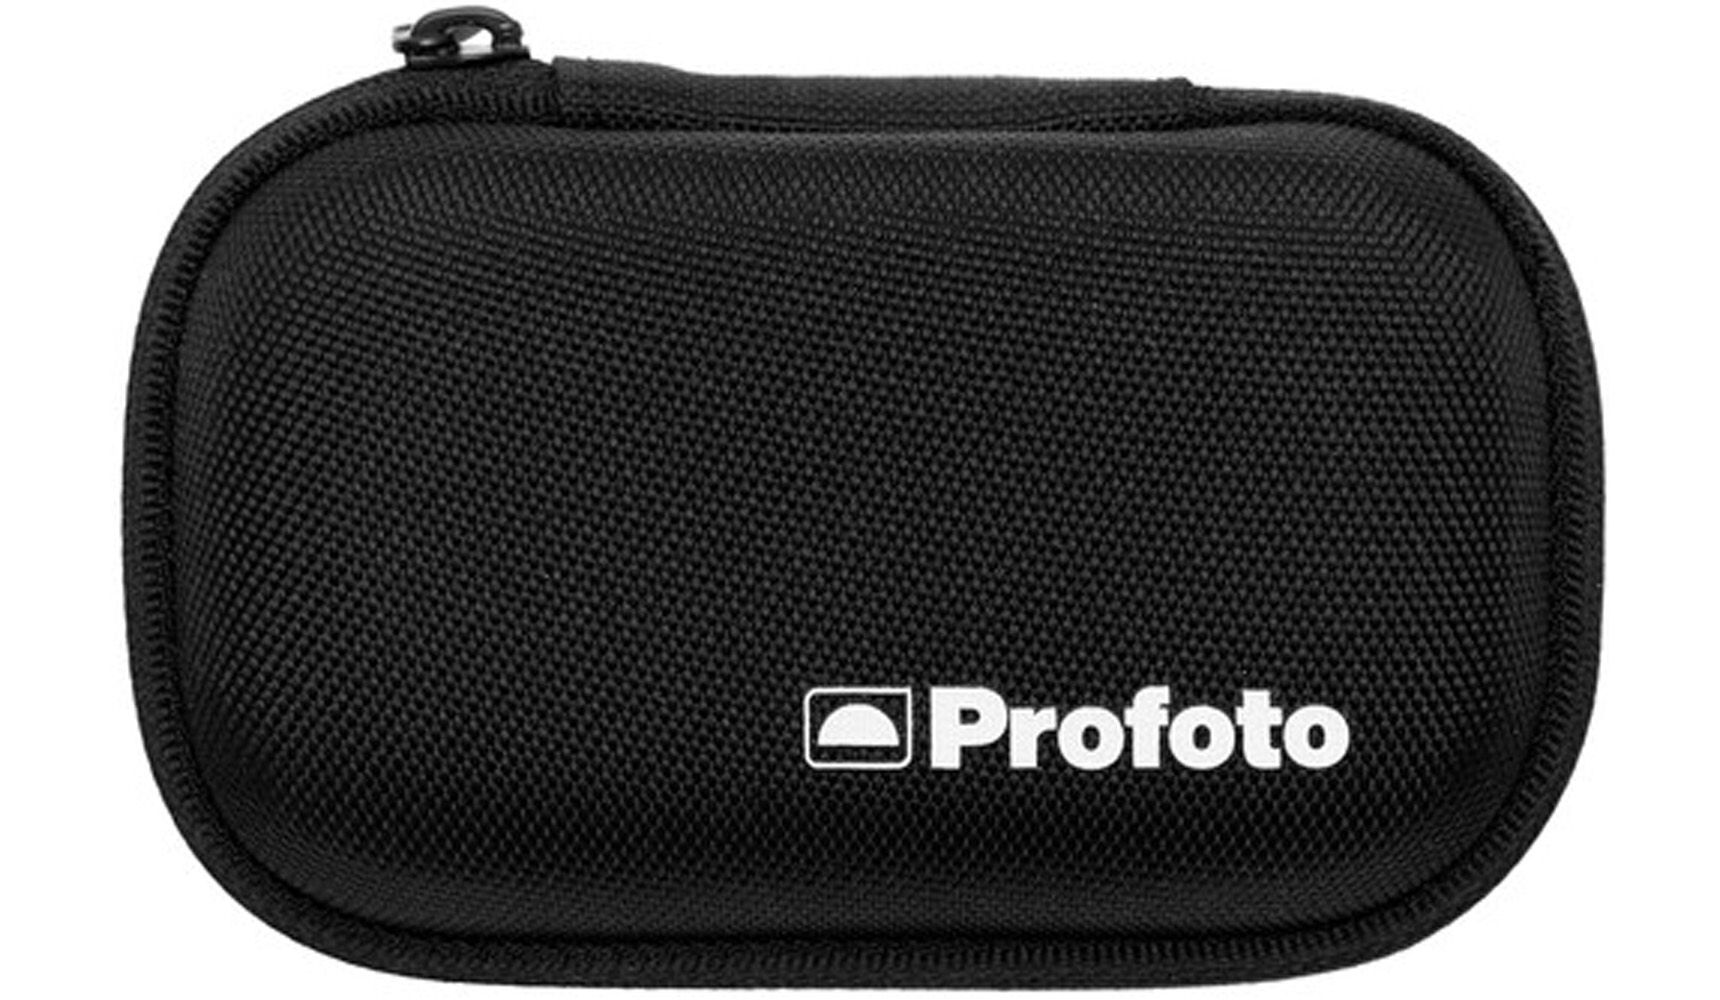 PROFOTO - Connect Pro for SONY